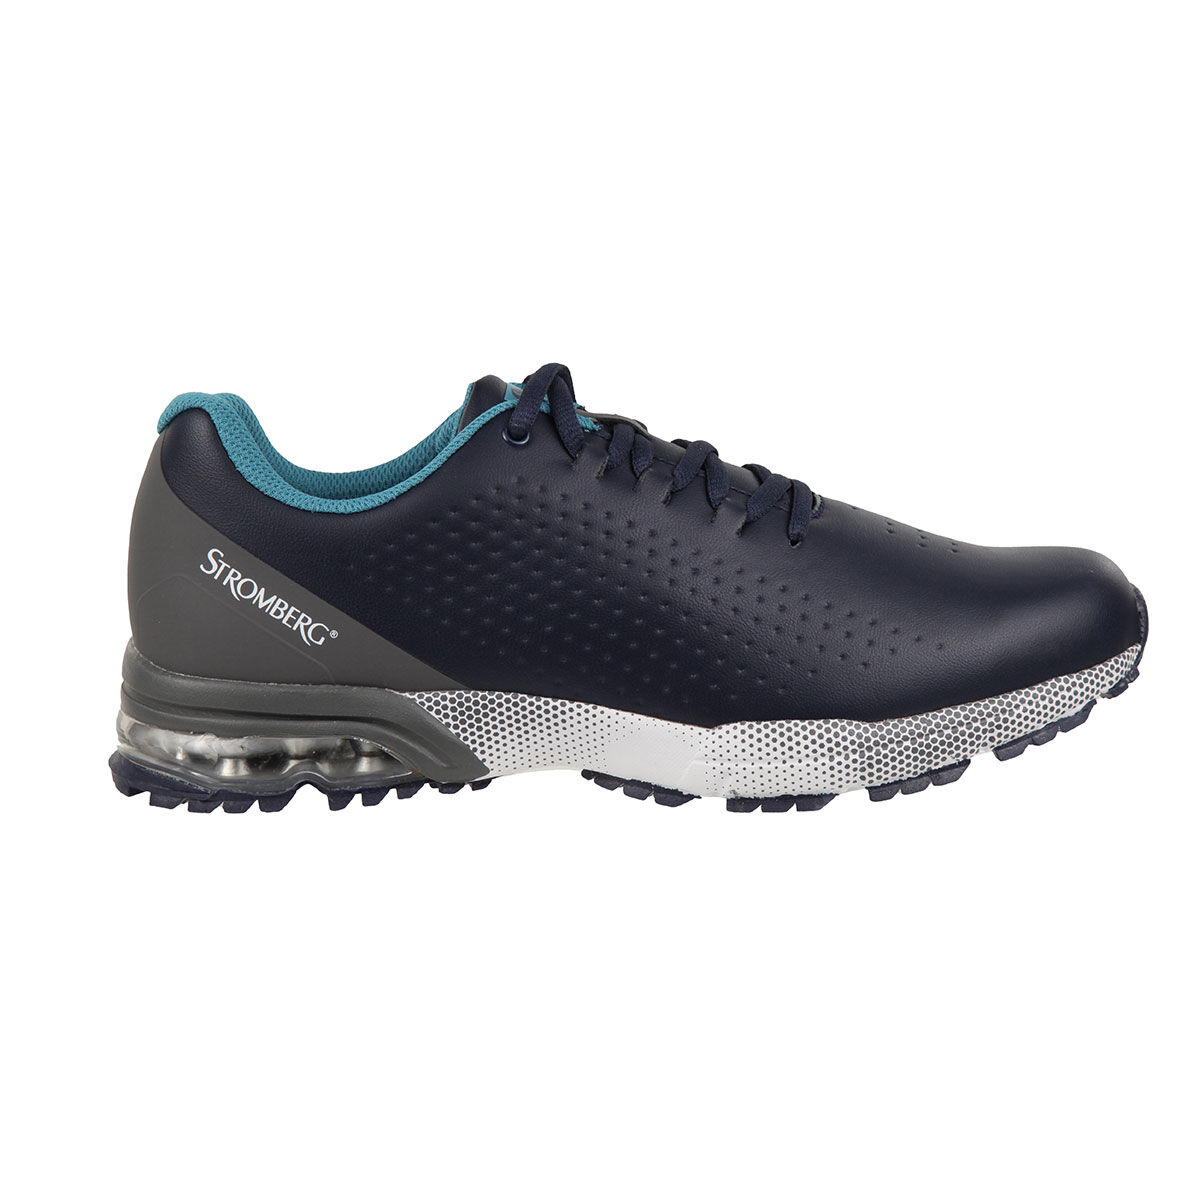 Stromberg Men's Ailsa Waterproof Spikeless Golf Shoes, Mens, Navy/blue, 11 | American Golf - Father's Day Gift von Stromberg